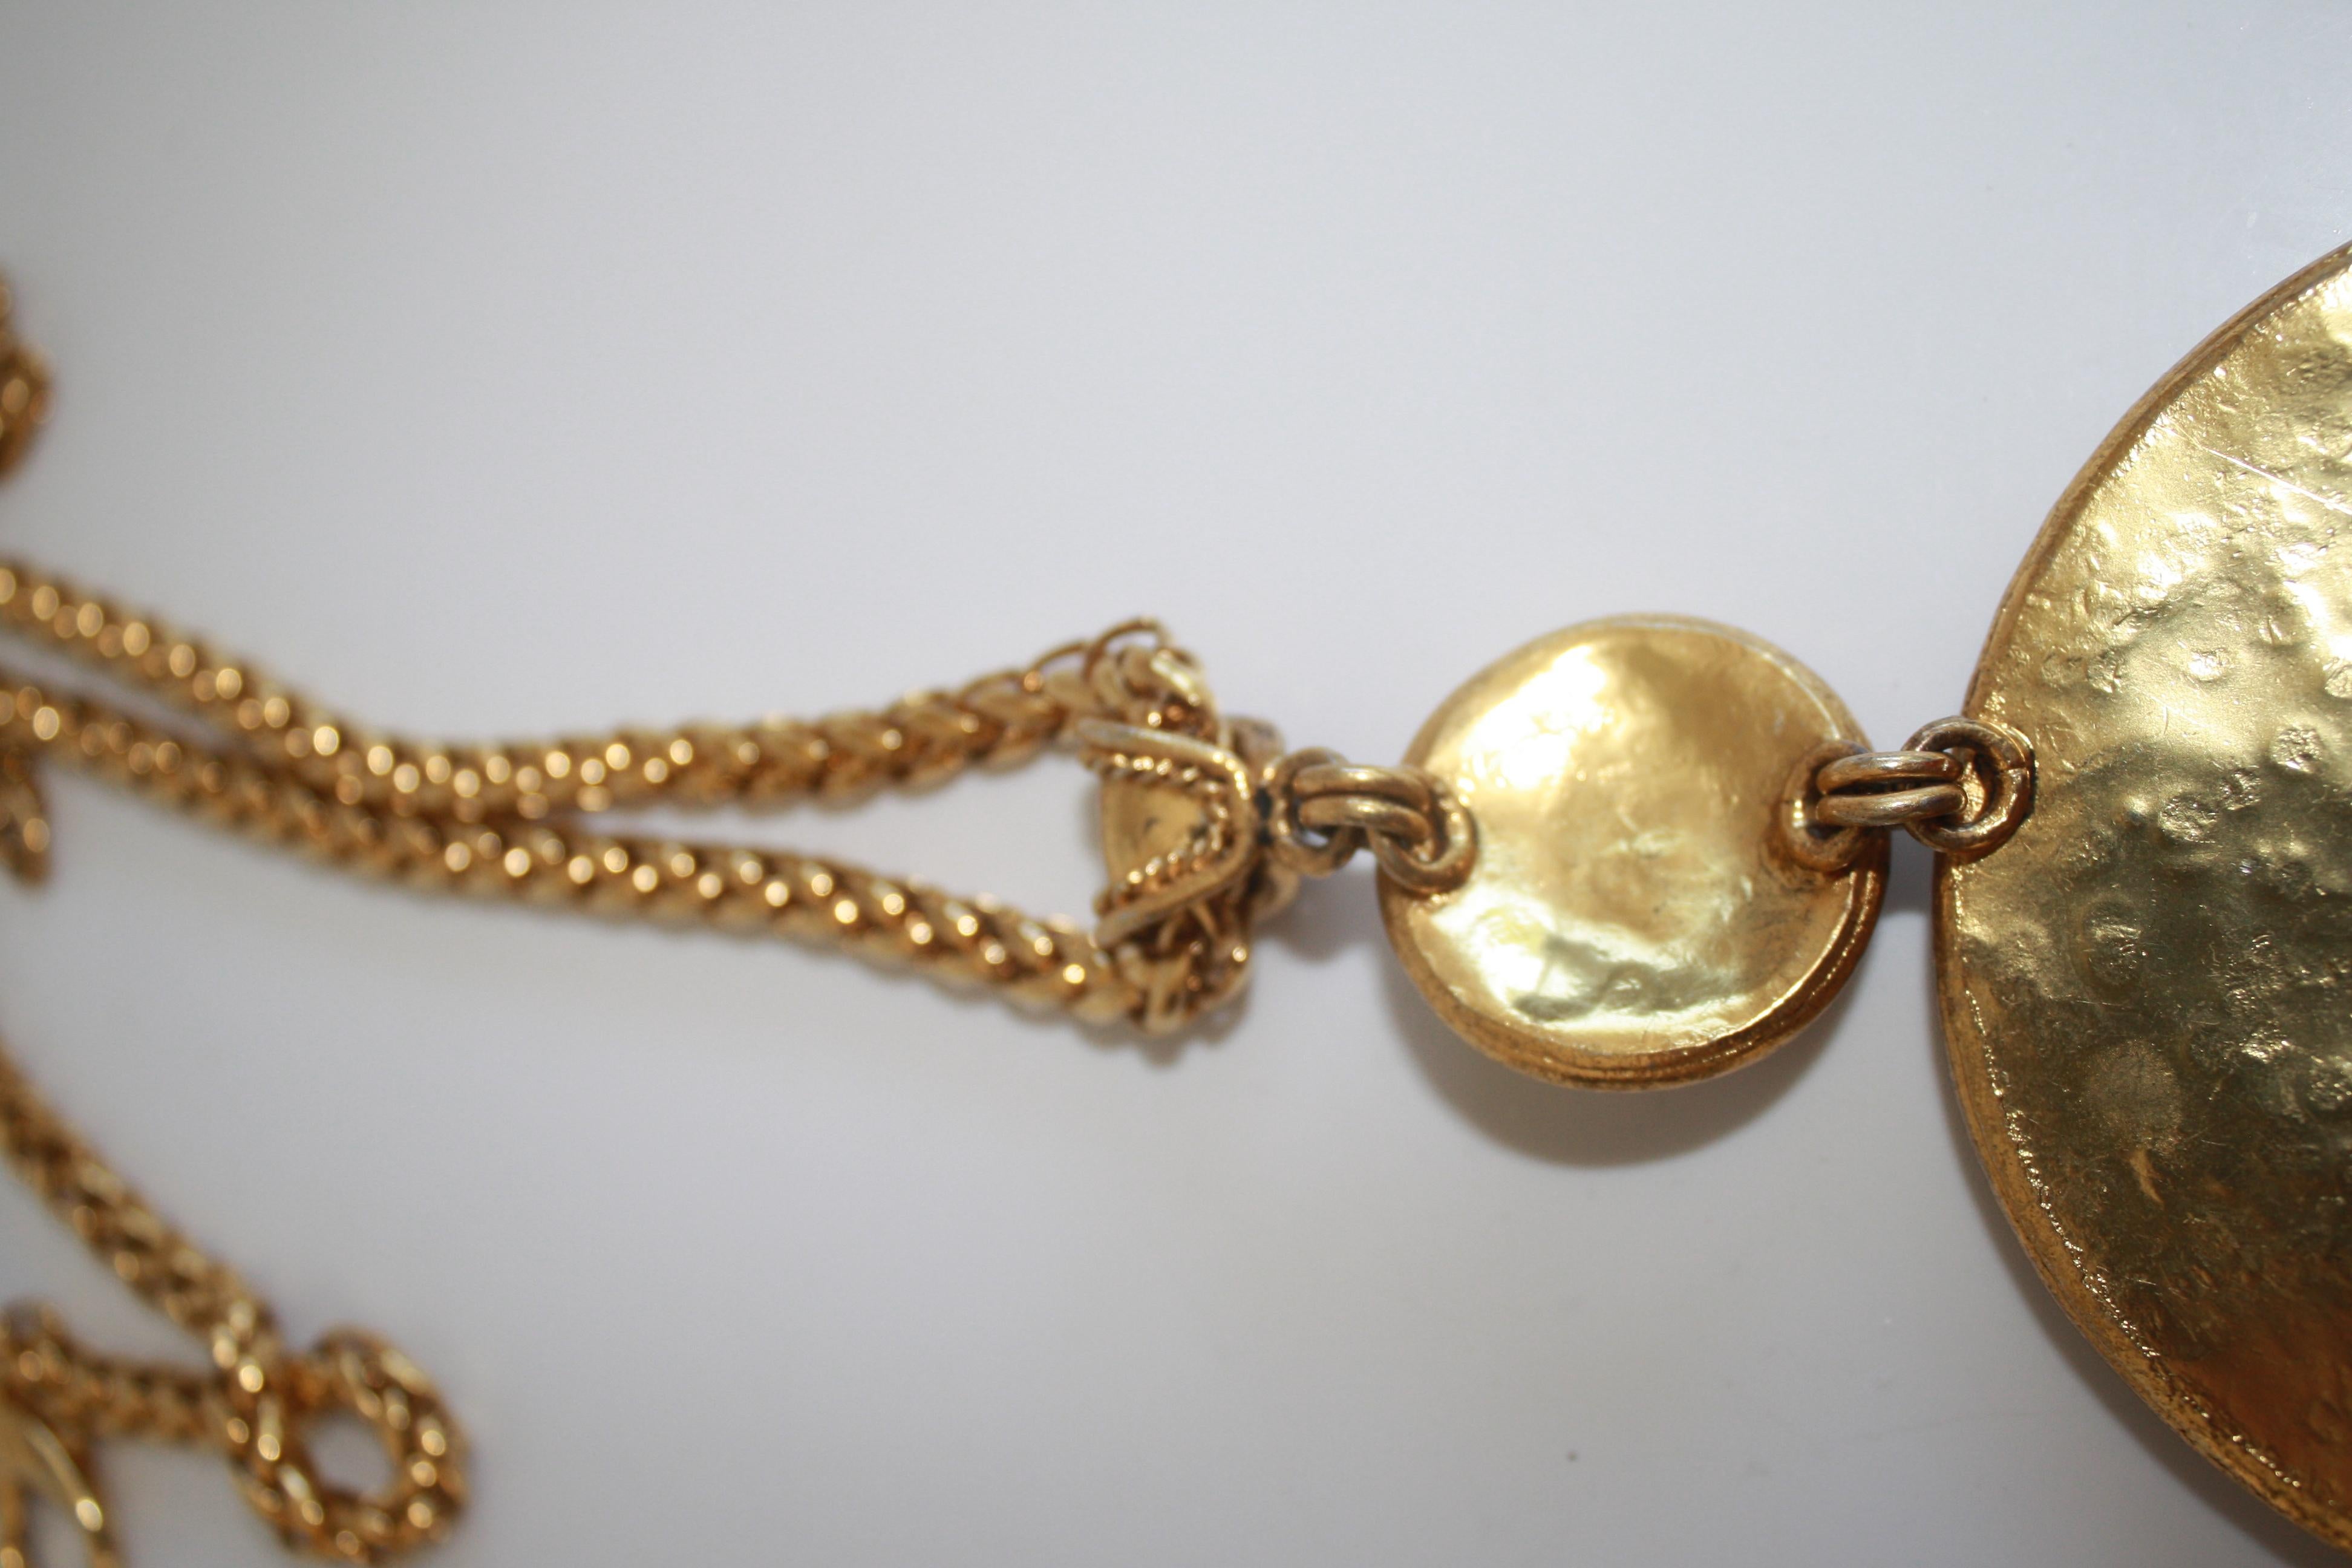 Pendant necklace - oversized in gilded brass with pate de verre glass detailing from Francoise Montague. Pendant is 6